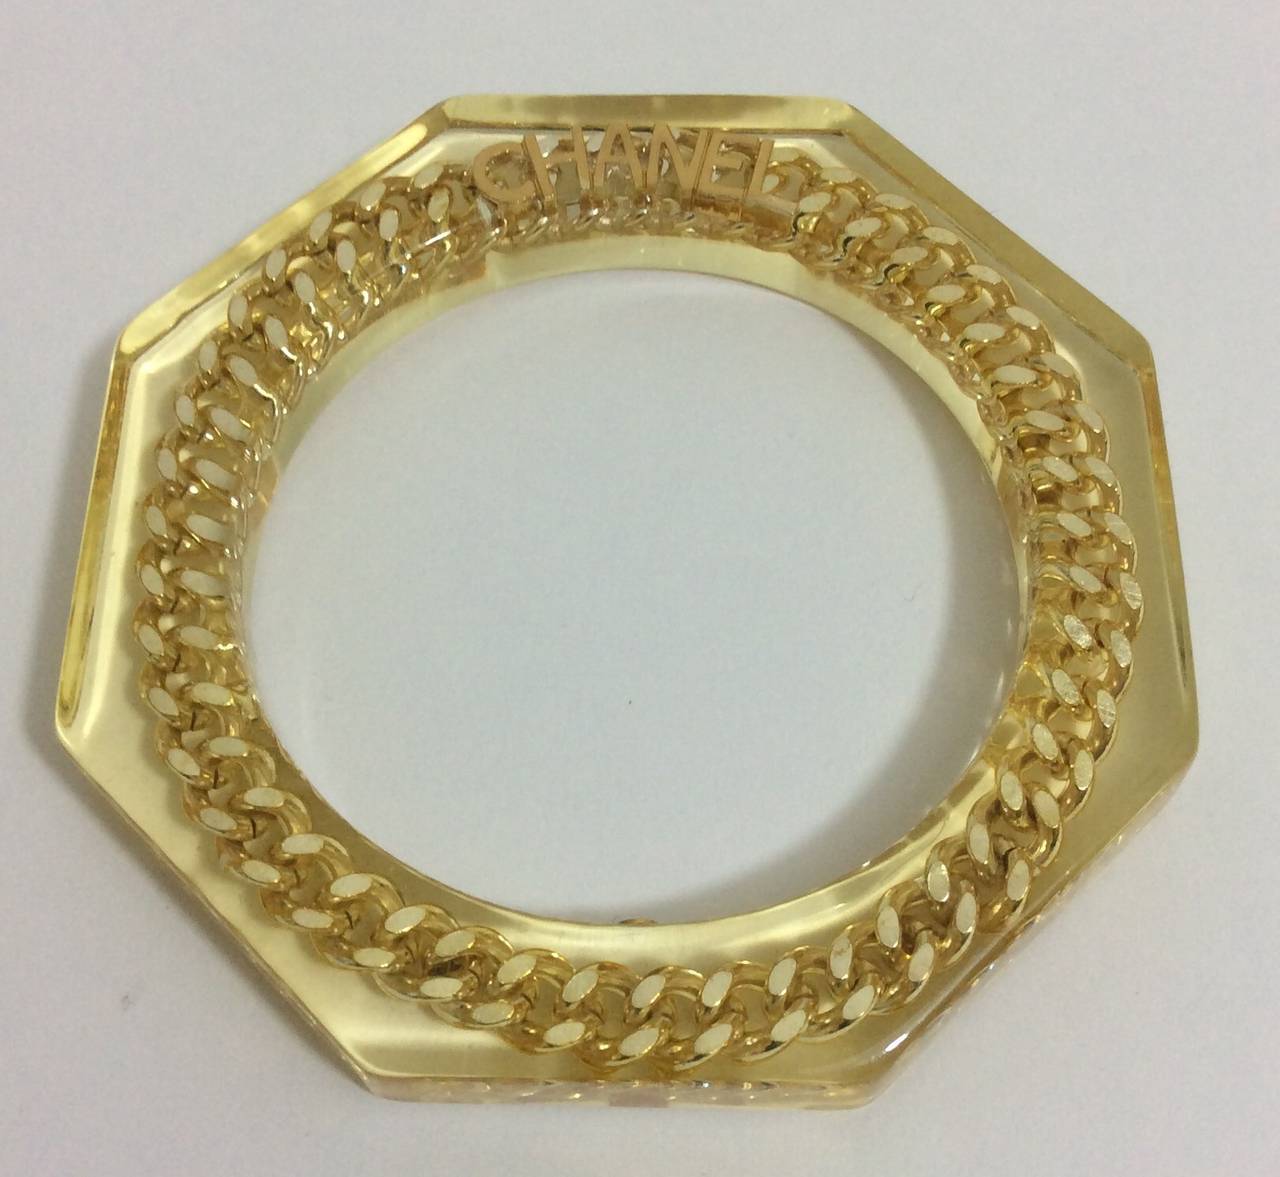 Chanel lucite bangle with a gold a  tone chain set inside the lucite.
Circumference: 7.75